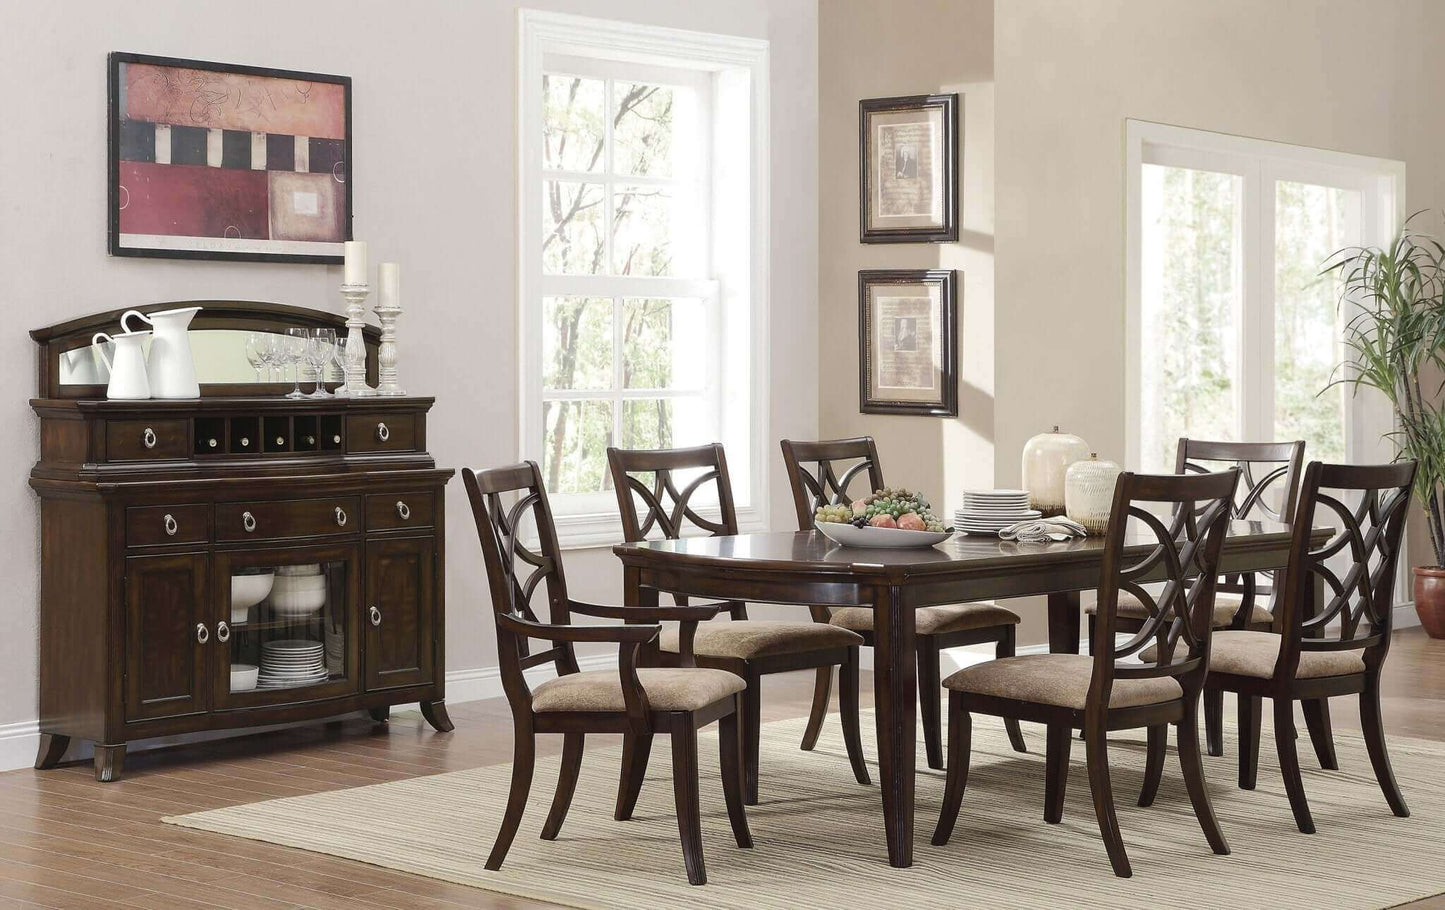 Cherry Finish Formal 7pc Dining Set with Extension Table in an elegant dining room setting